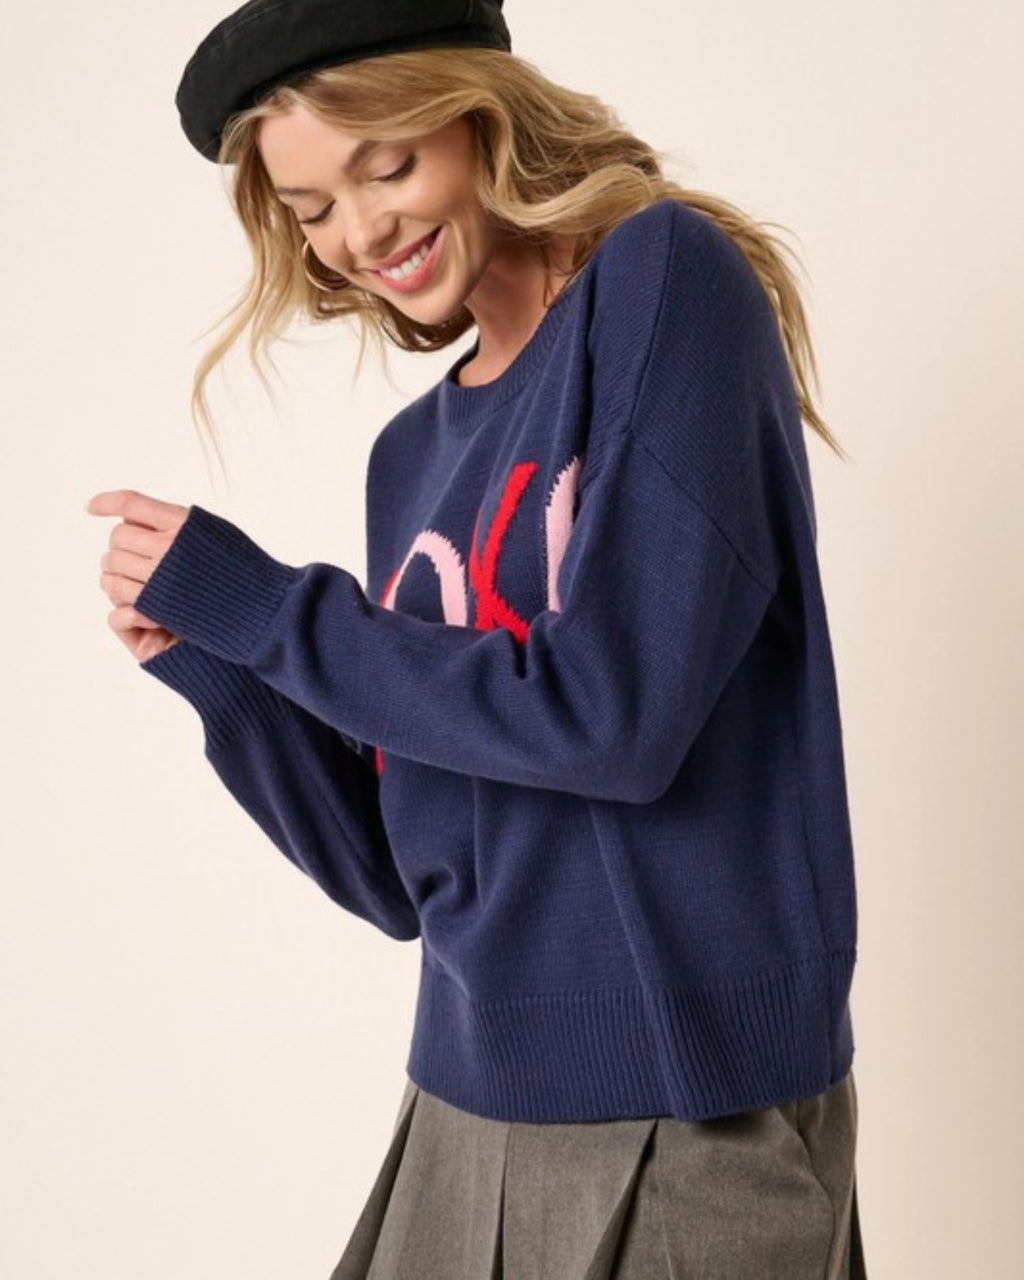 XOXO Letter Sweater